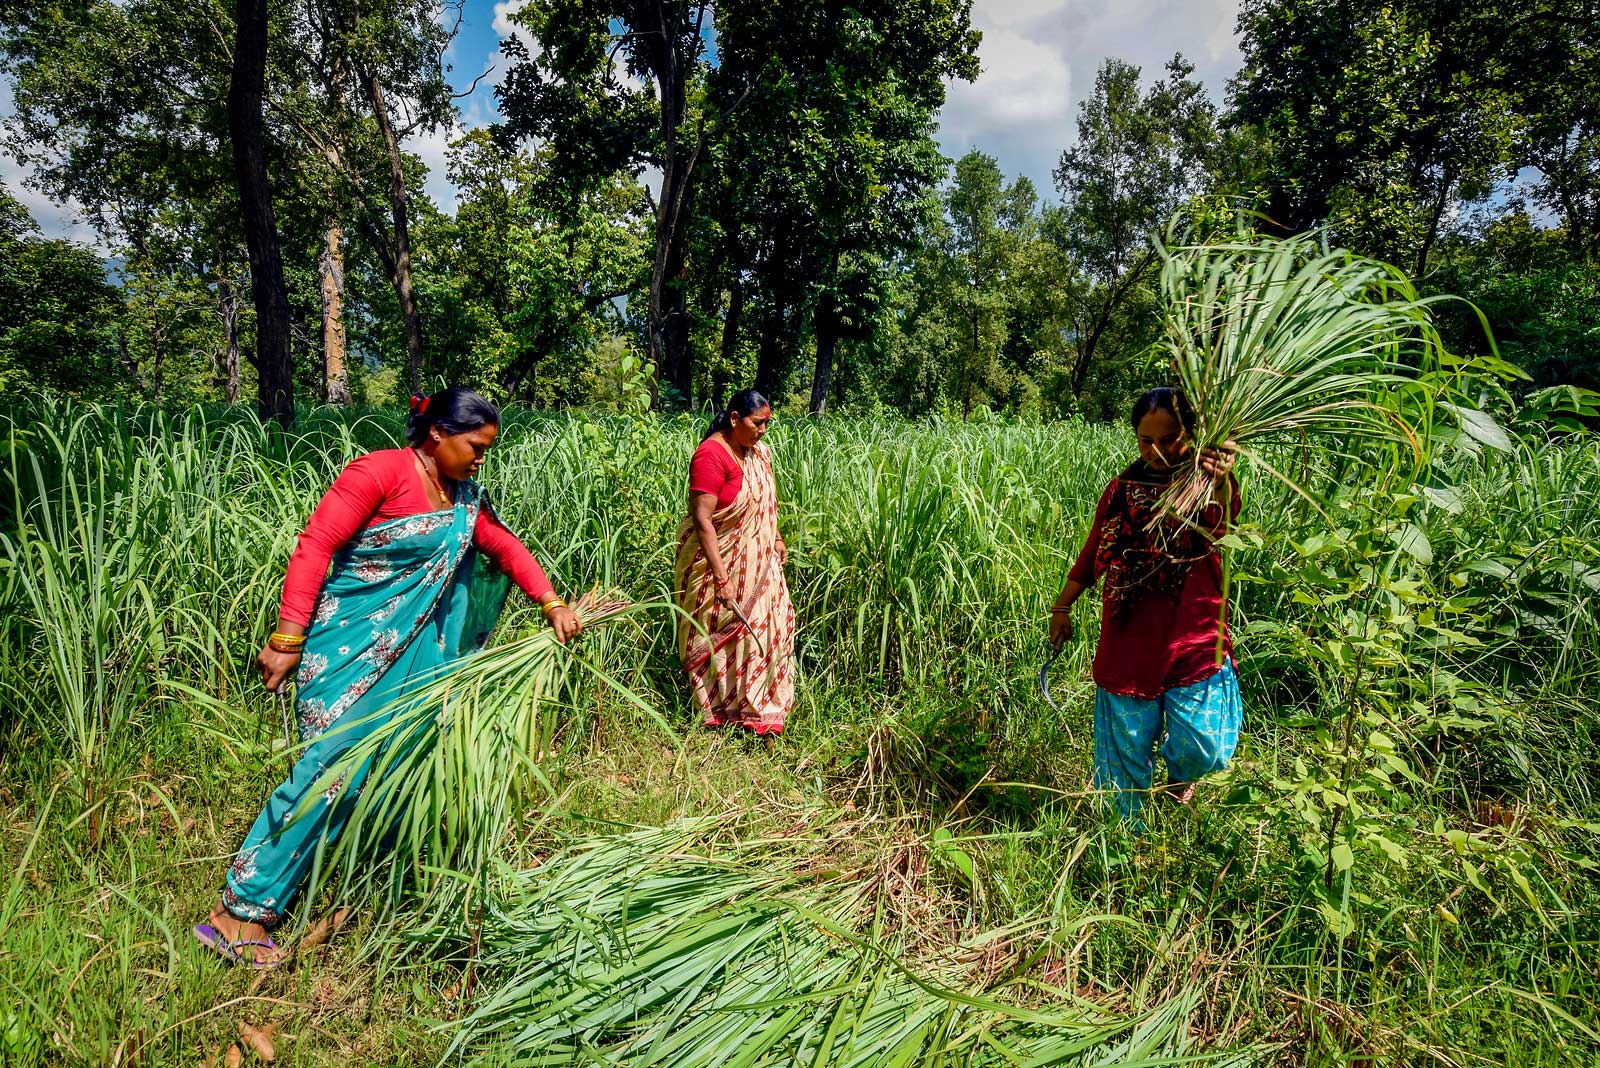 Photograph of women harvesting lemongrass in Nepal. The photo shows three women in a field of long grass. One women is walking with a tool in her hand, and two are holding bunches of lemongrass, which the are preparing to place in a pile on the ground.